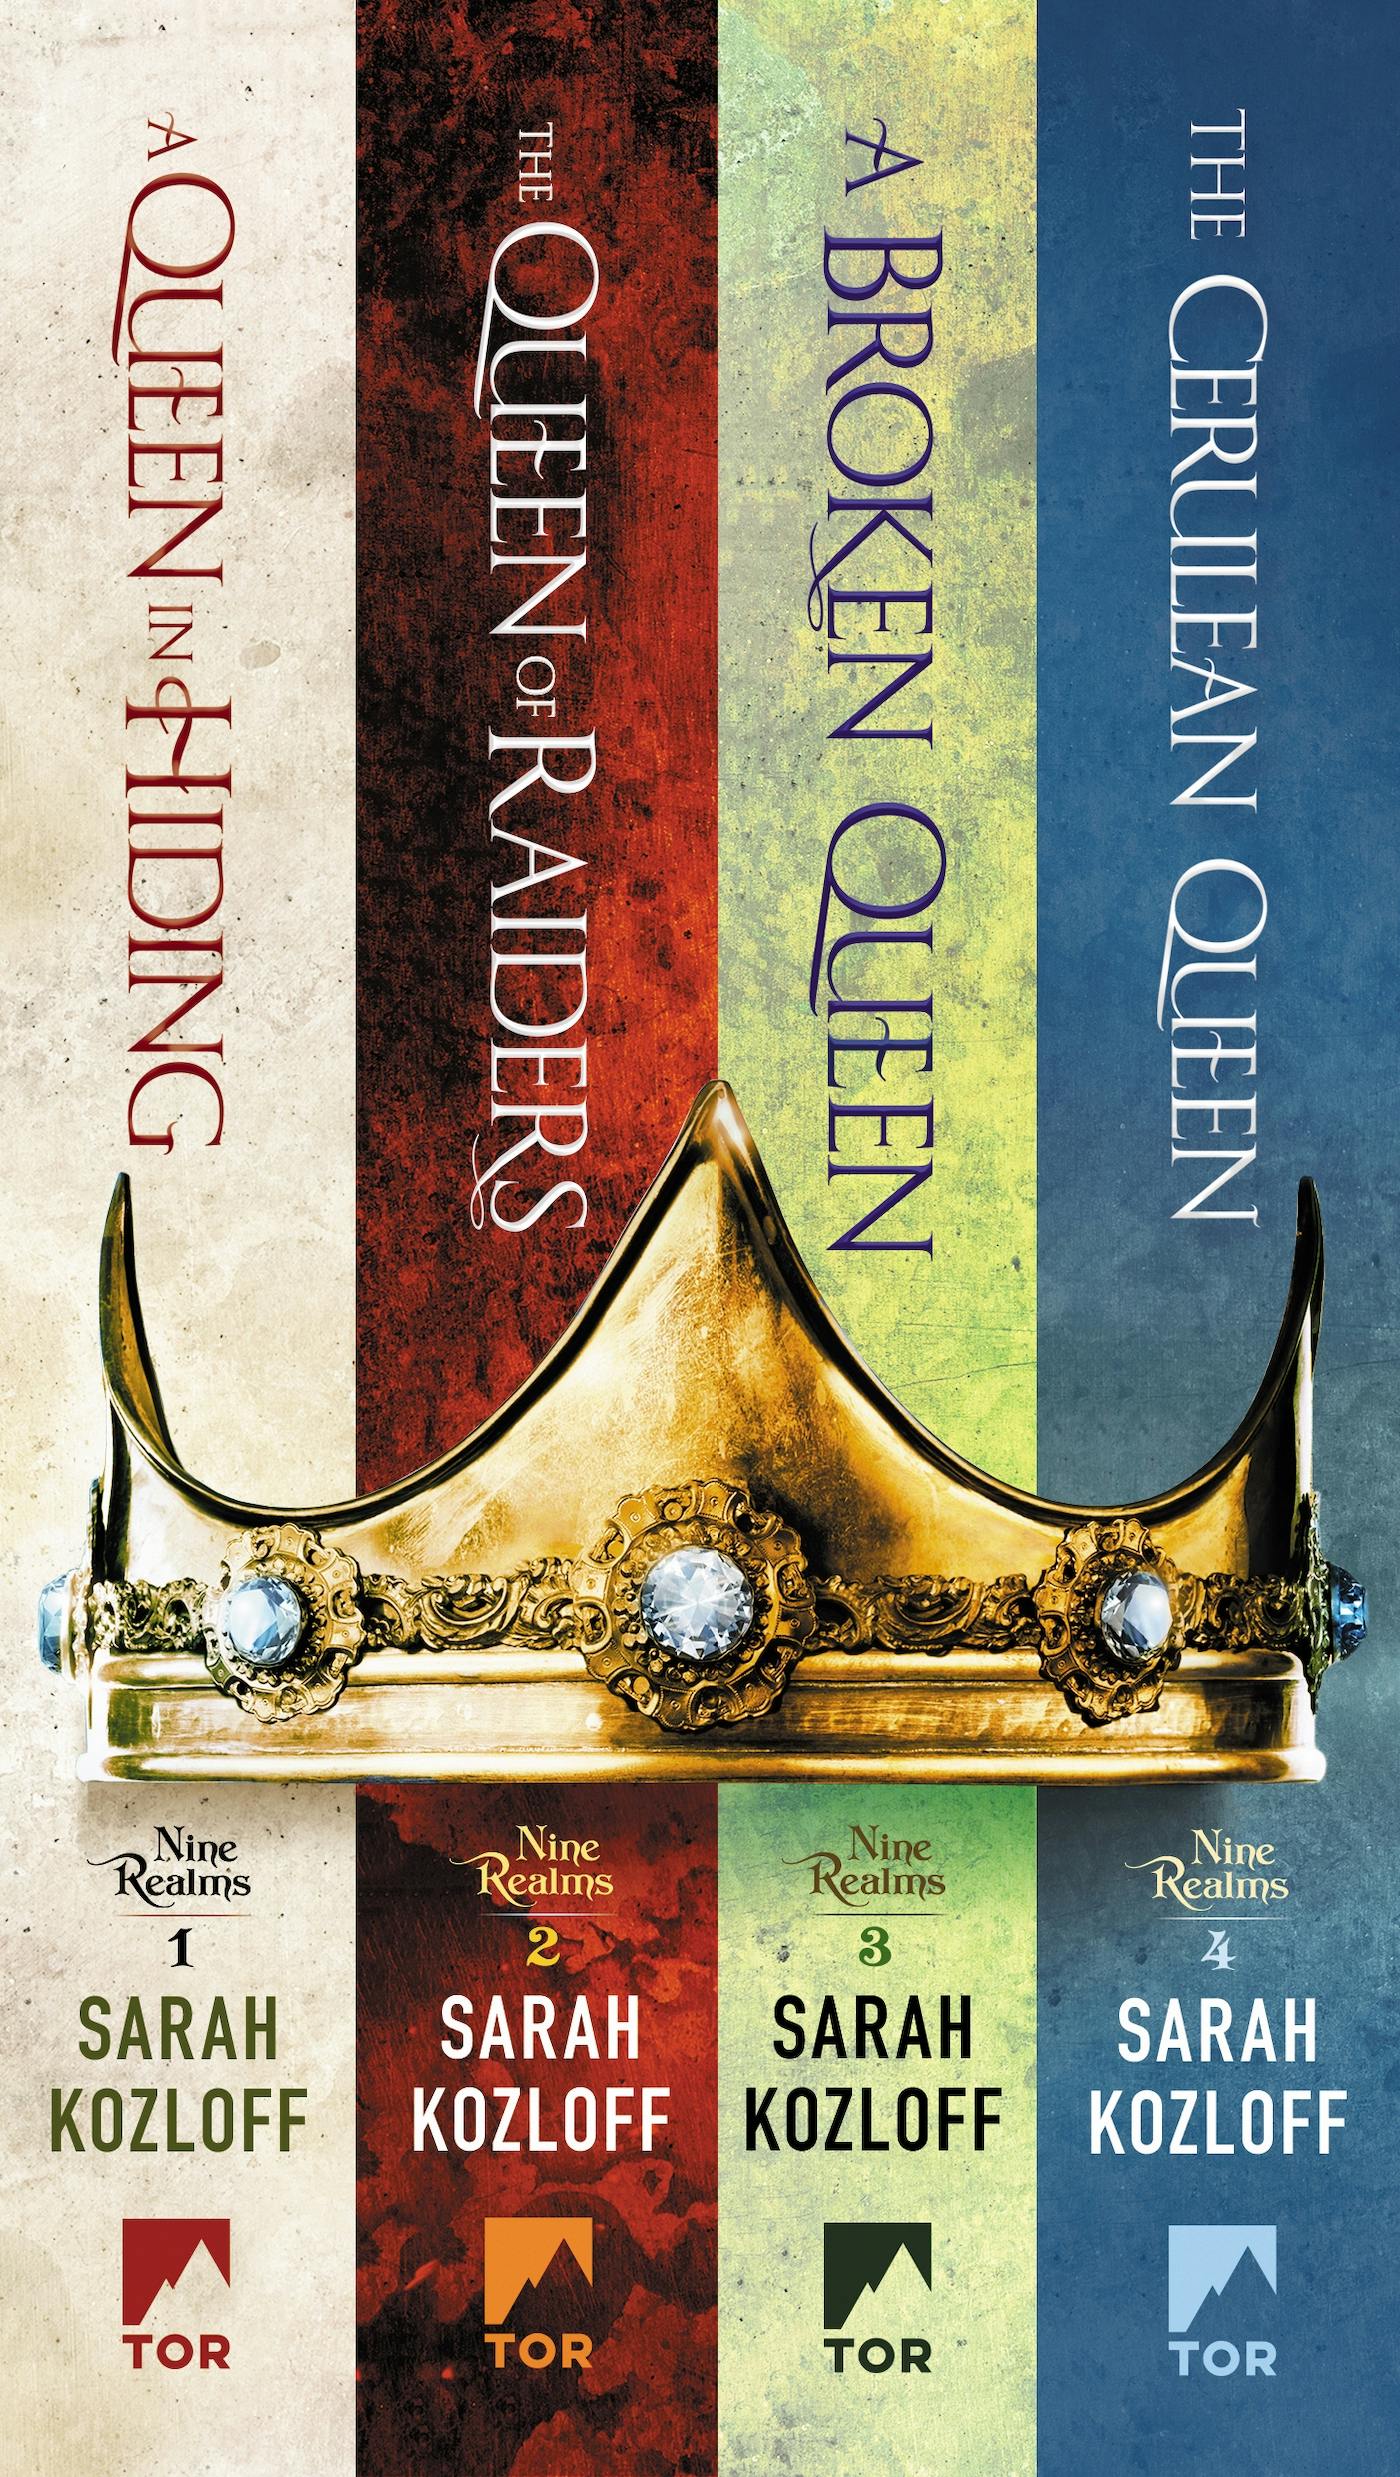 Cover for the book titled as: The Nine Realms